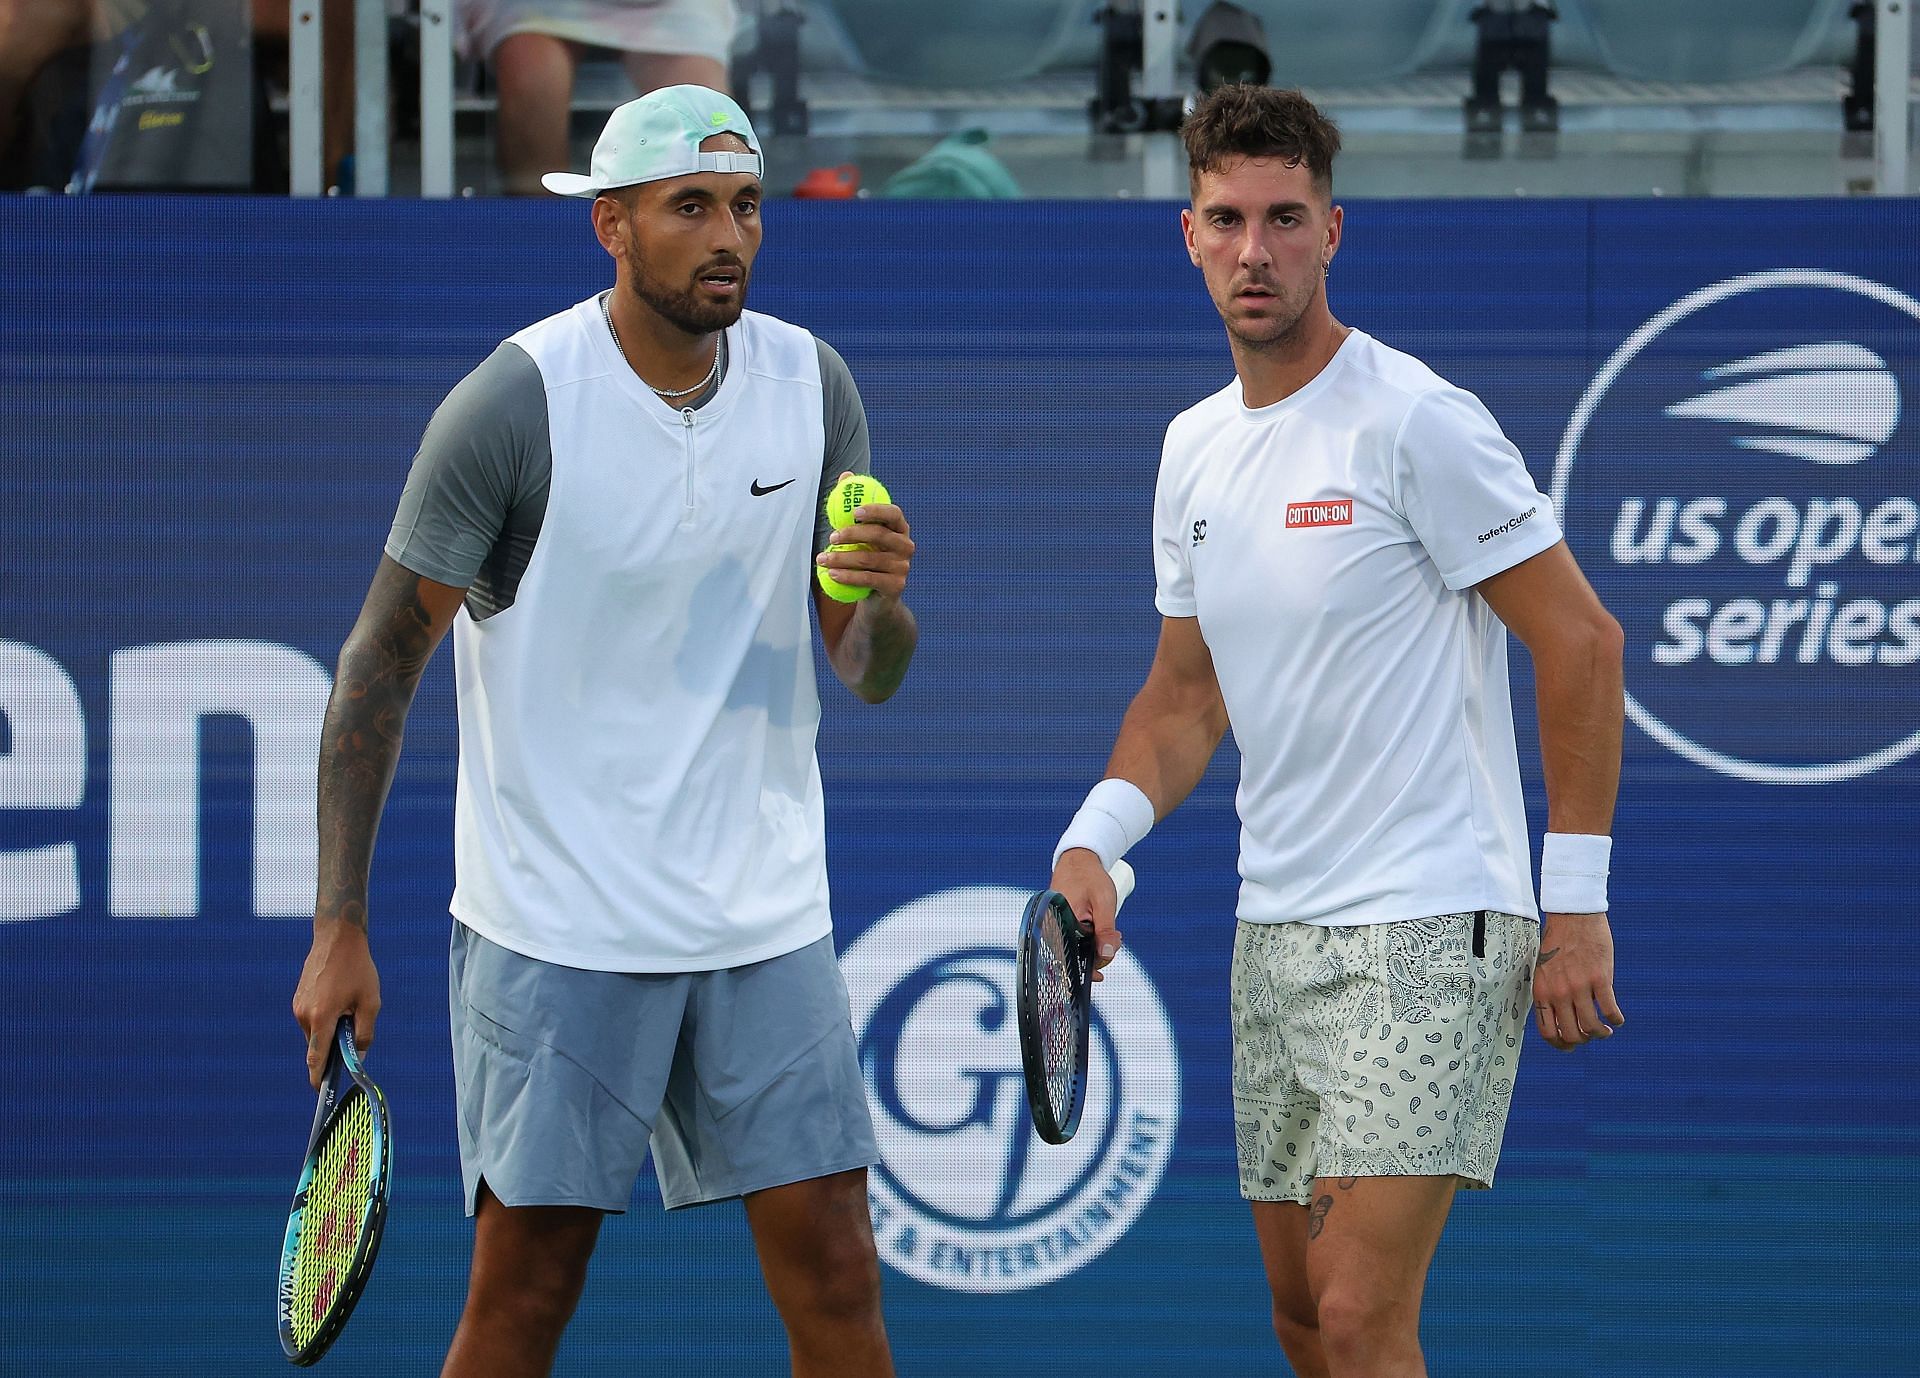 Kokkinakis will have the advantage of knowing his opponent&rsquo;s game style inside-out